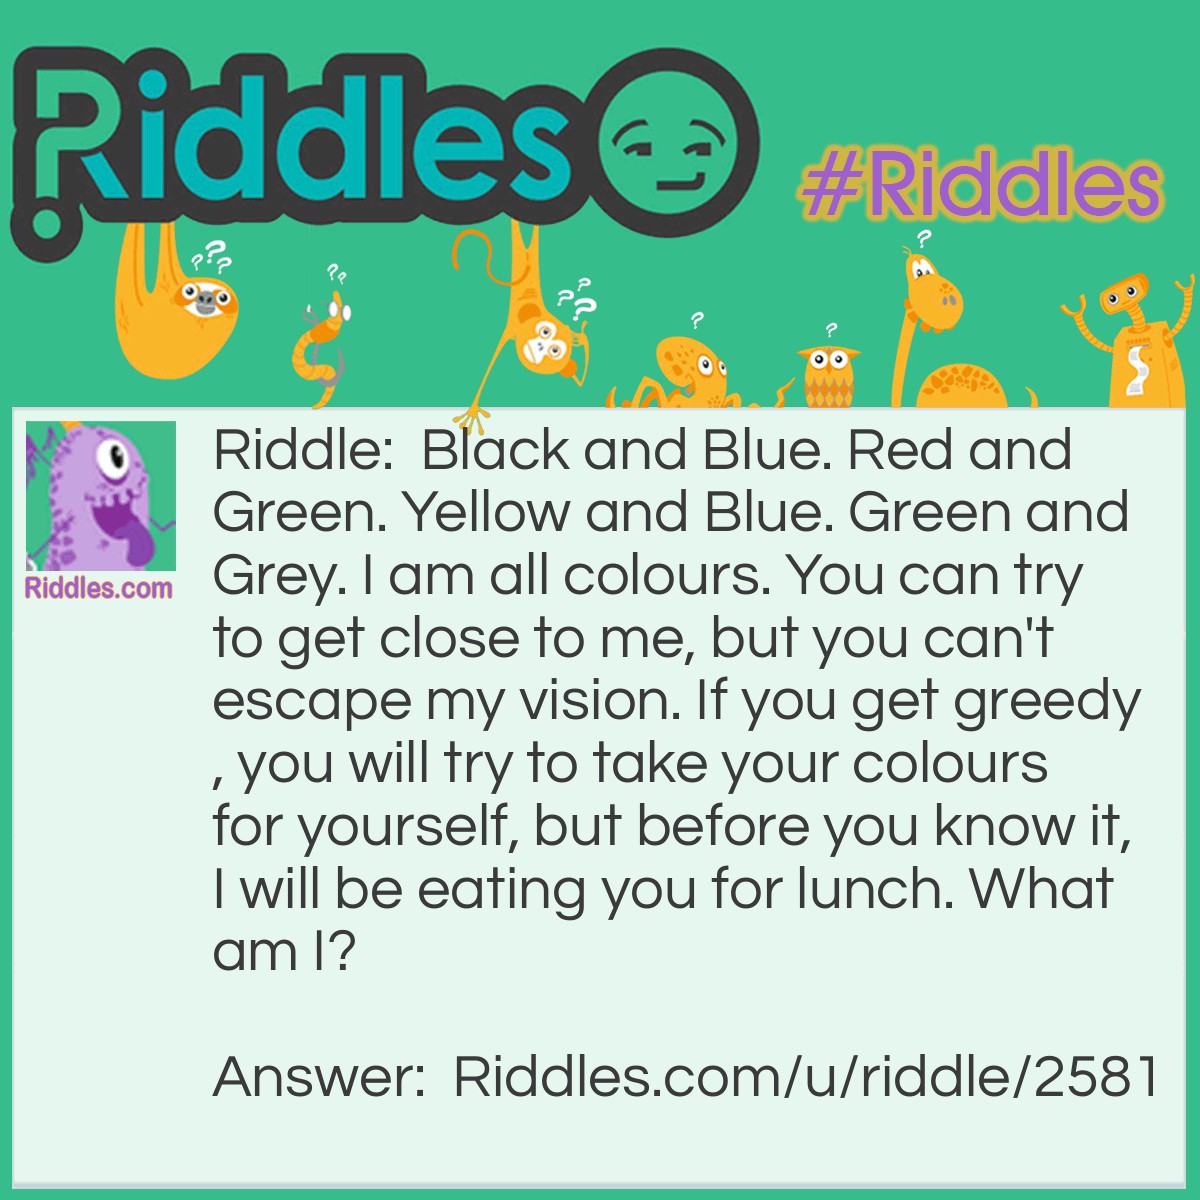 Riddle: Black and Blue. Red and Green. Yellow and Blue. Green and Grey. I am all colours. You can try to get close to me, but you can't escape my vision. If you get greedy, you will try to take your colours for yourself, but before you know it, I will be eating you for lunch. What am I? Answer: A Chameleon.